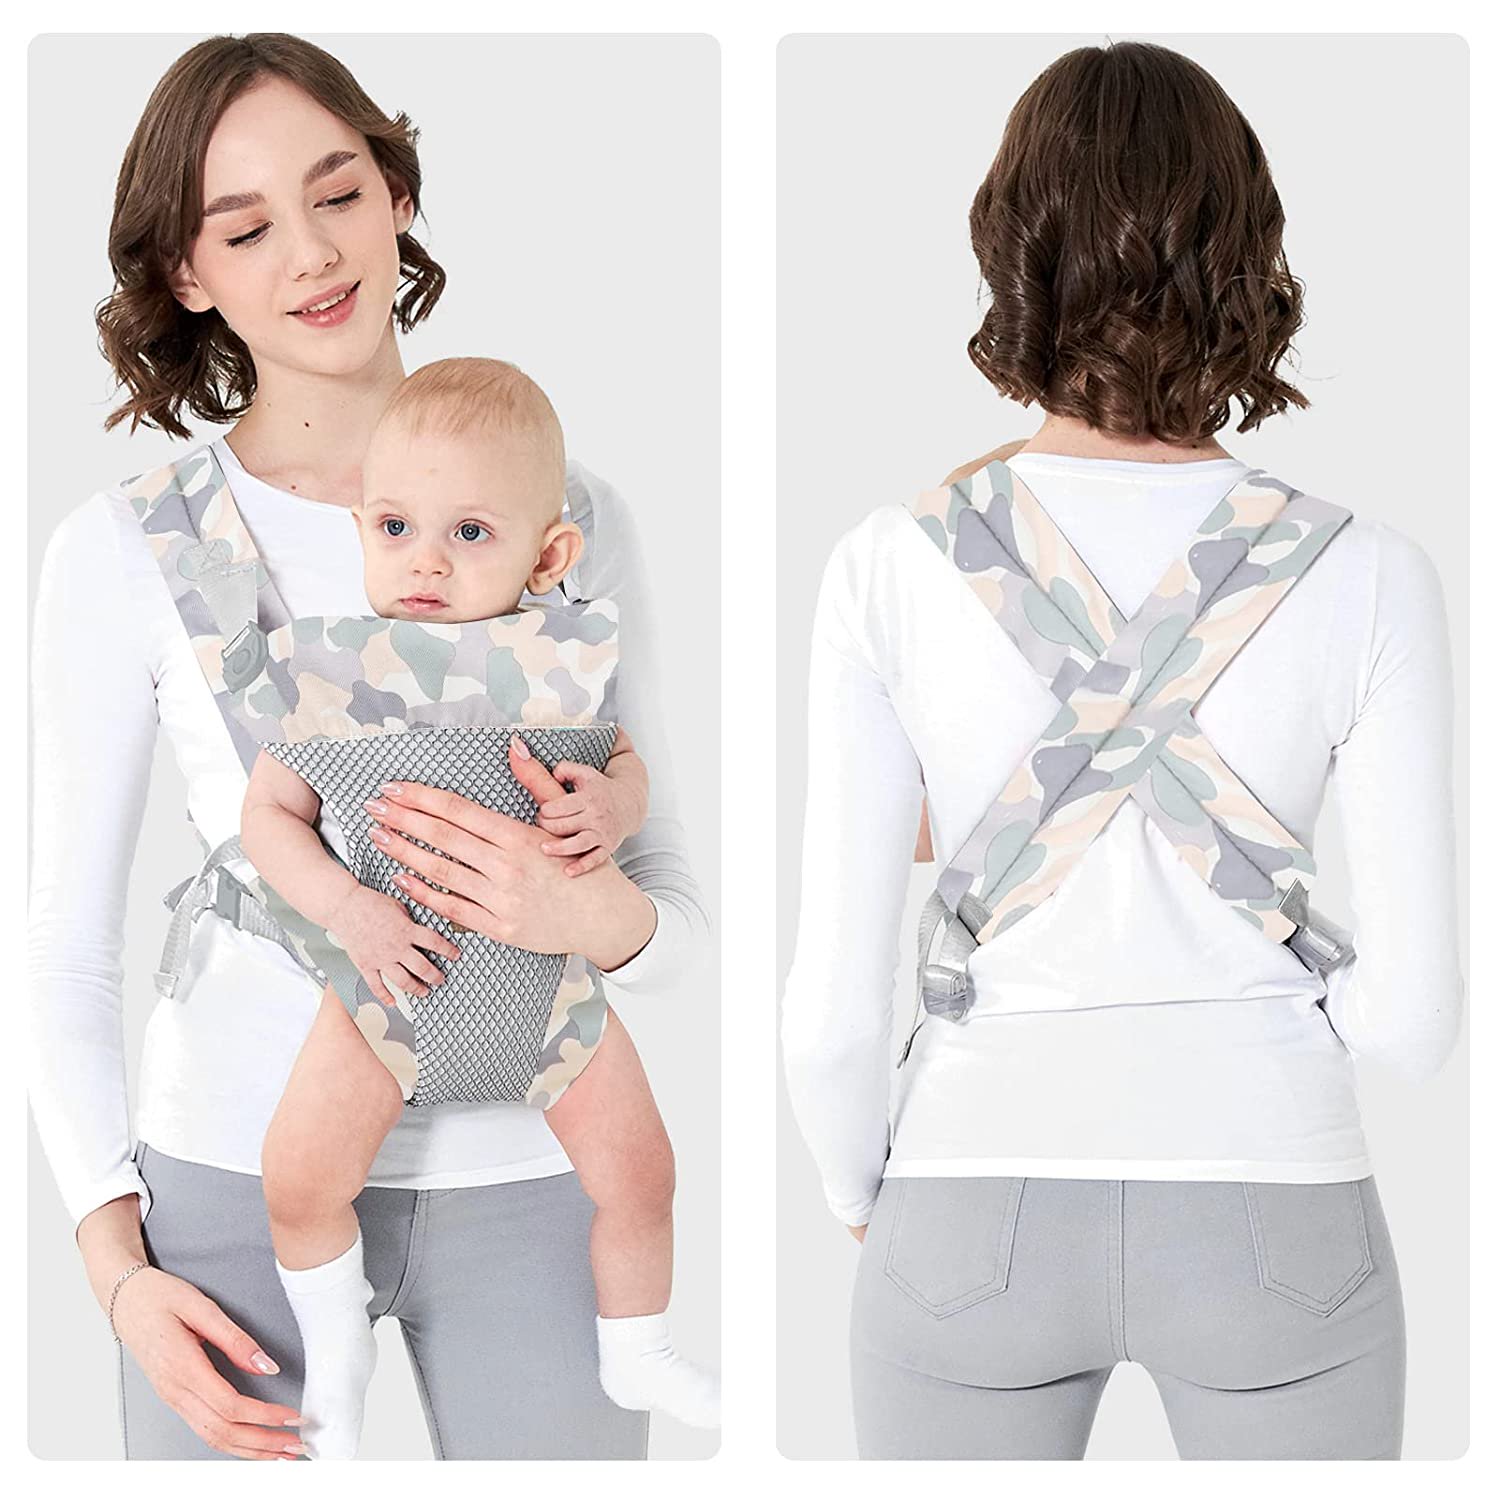 Yadala Baby Carrier, 4-in-1 Camouflage Baby Carrier, Front and Back Baby Sling with Adjustable Holder - image 3 of 8